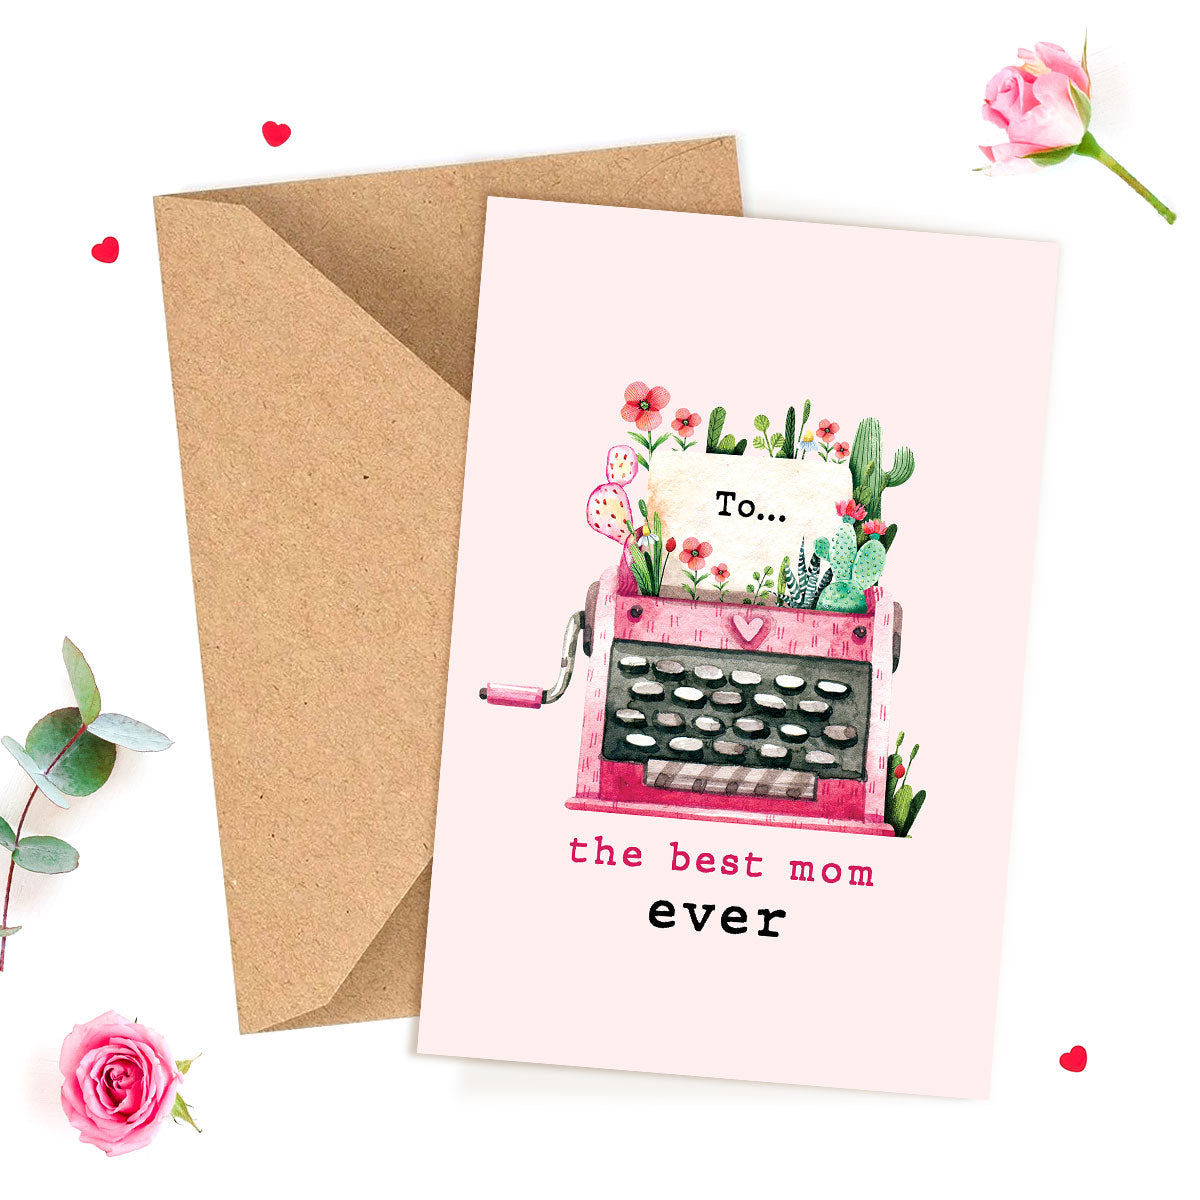 Best Mom Ever Card for Sale Online, Mother's Day Succulent Card, Buy Succulents Greeting Card